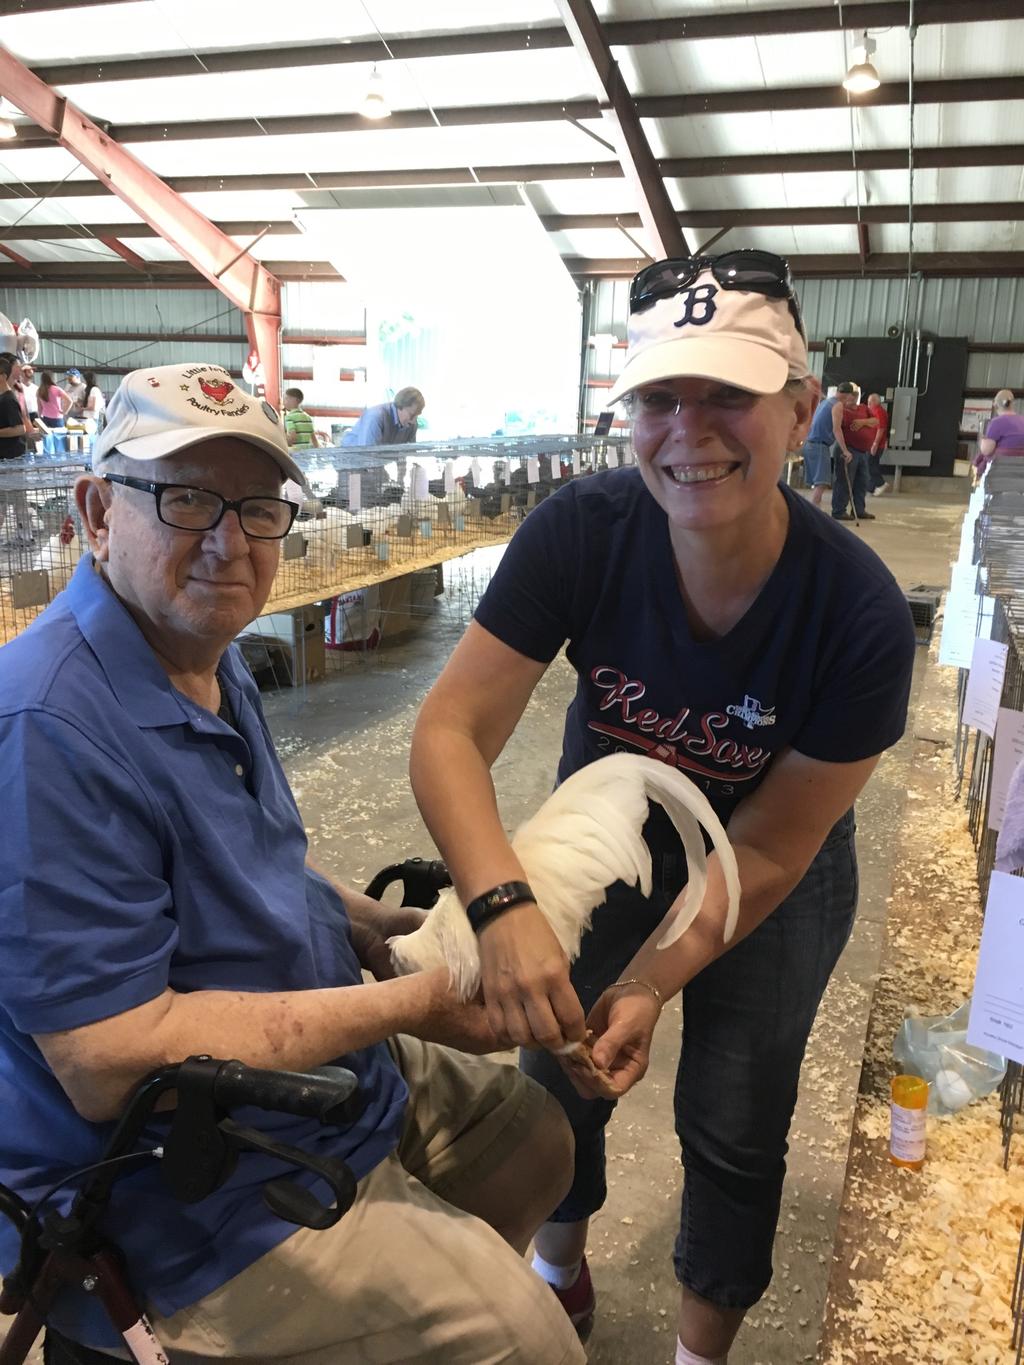 In honor of Father's Day, we would like to honor the Parent and Child connection in the poultry fancy. We will have a special show section for a Parent/ Child entry. No Entry Fee for this class.